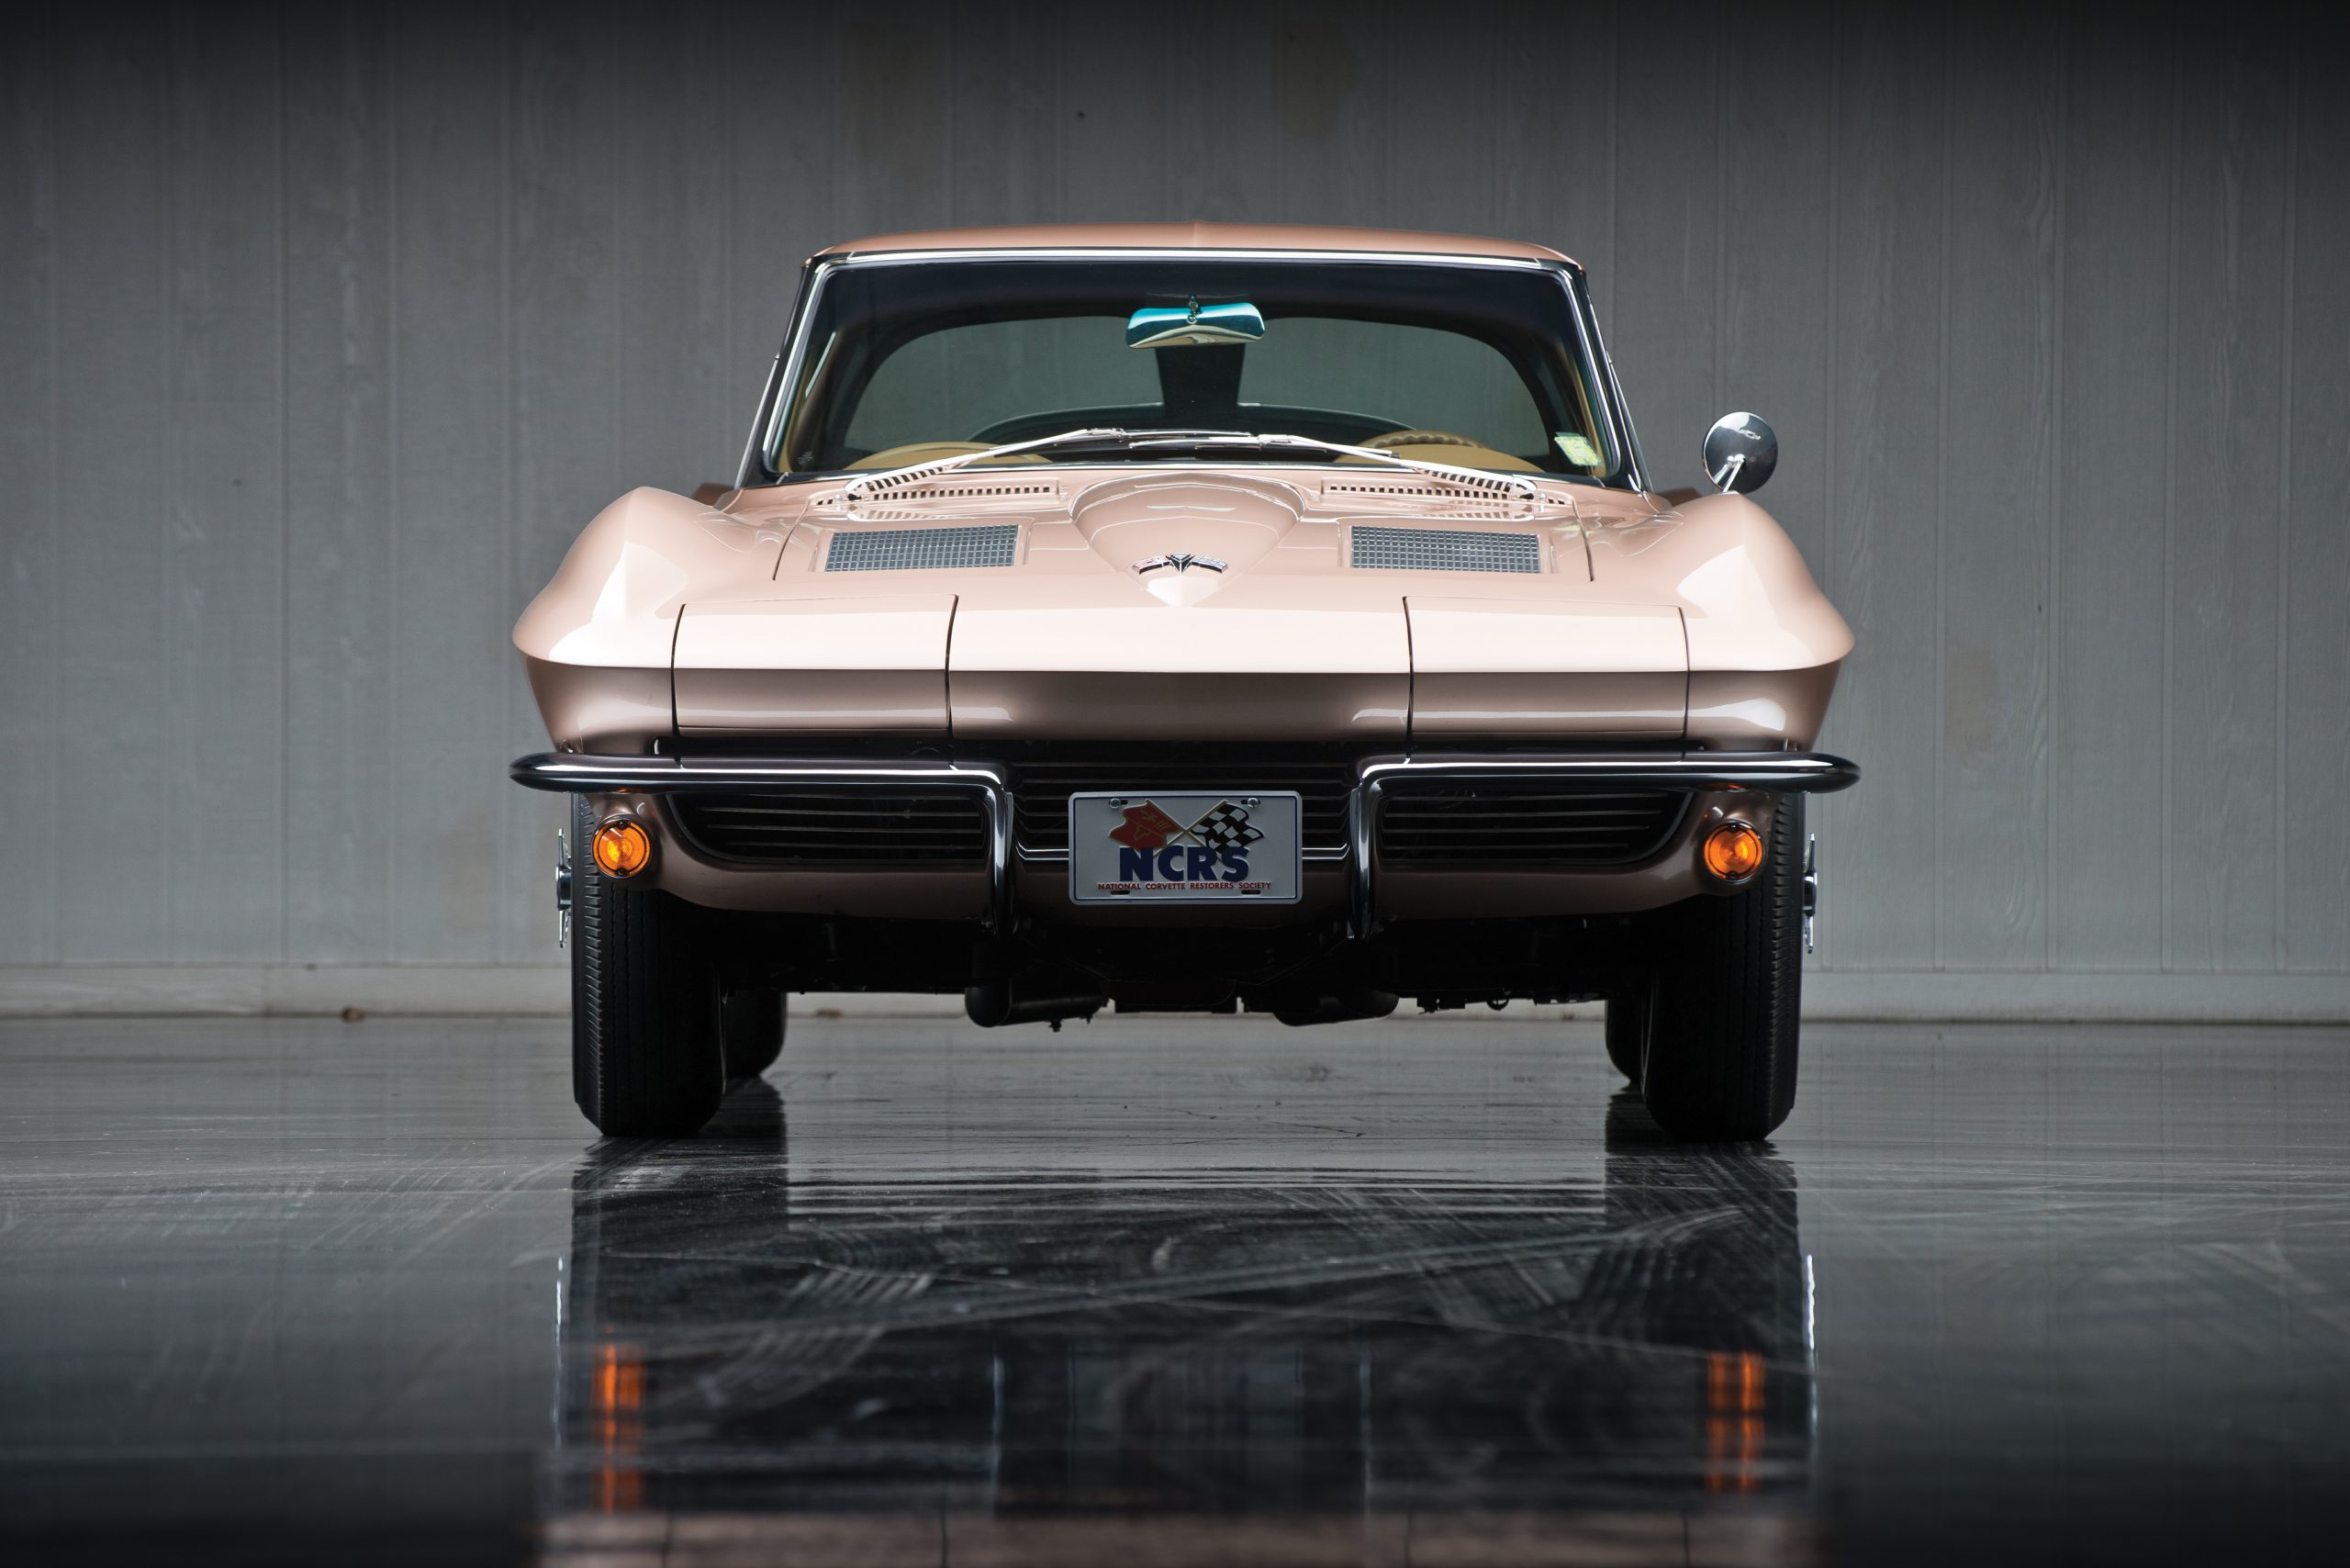 1963 Chevrolet Corvette Sting Ray 'Fuel-Injected' Split-Window Coupe Darin Schnabel | ©2013 Courtesy of RM Auctions